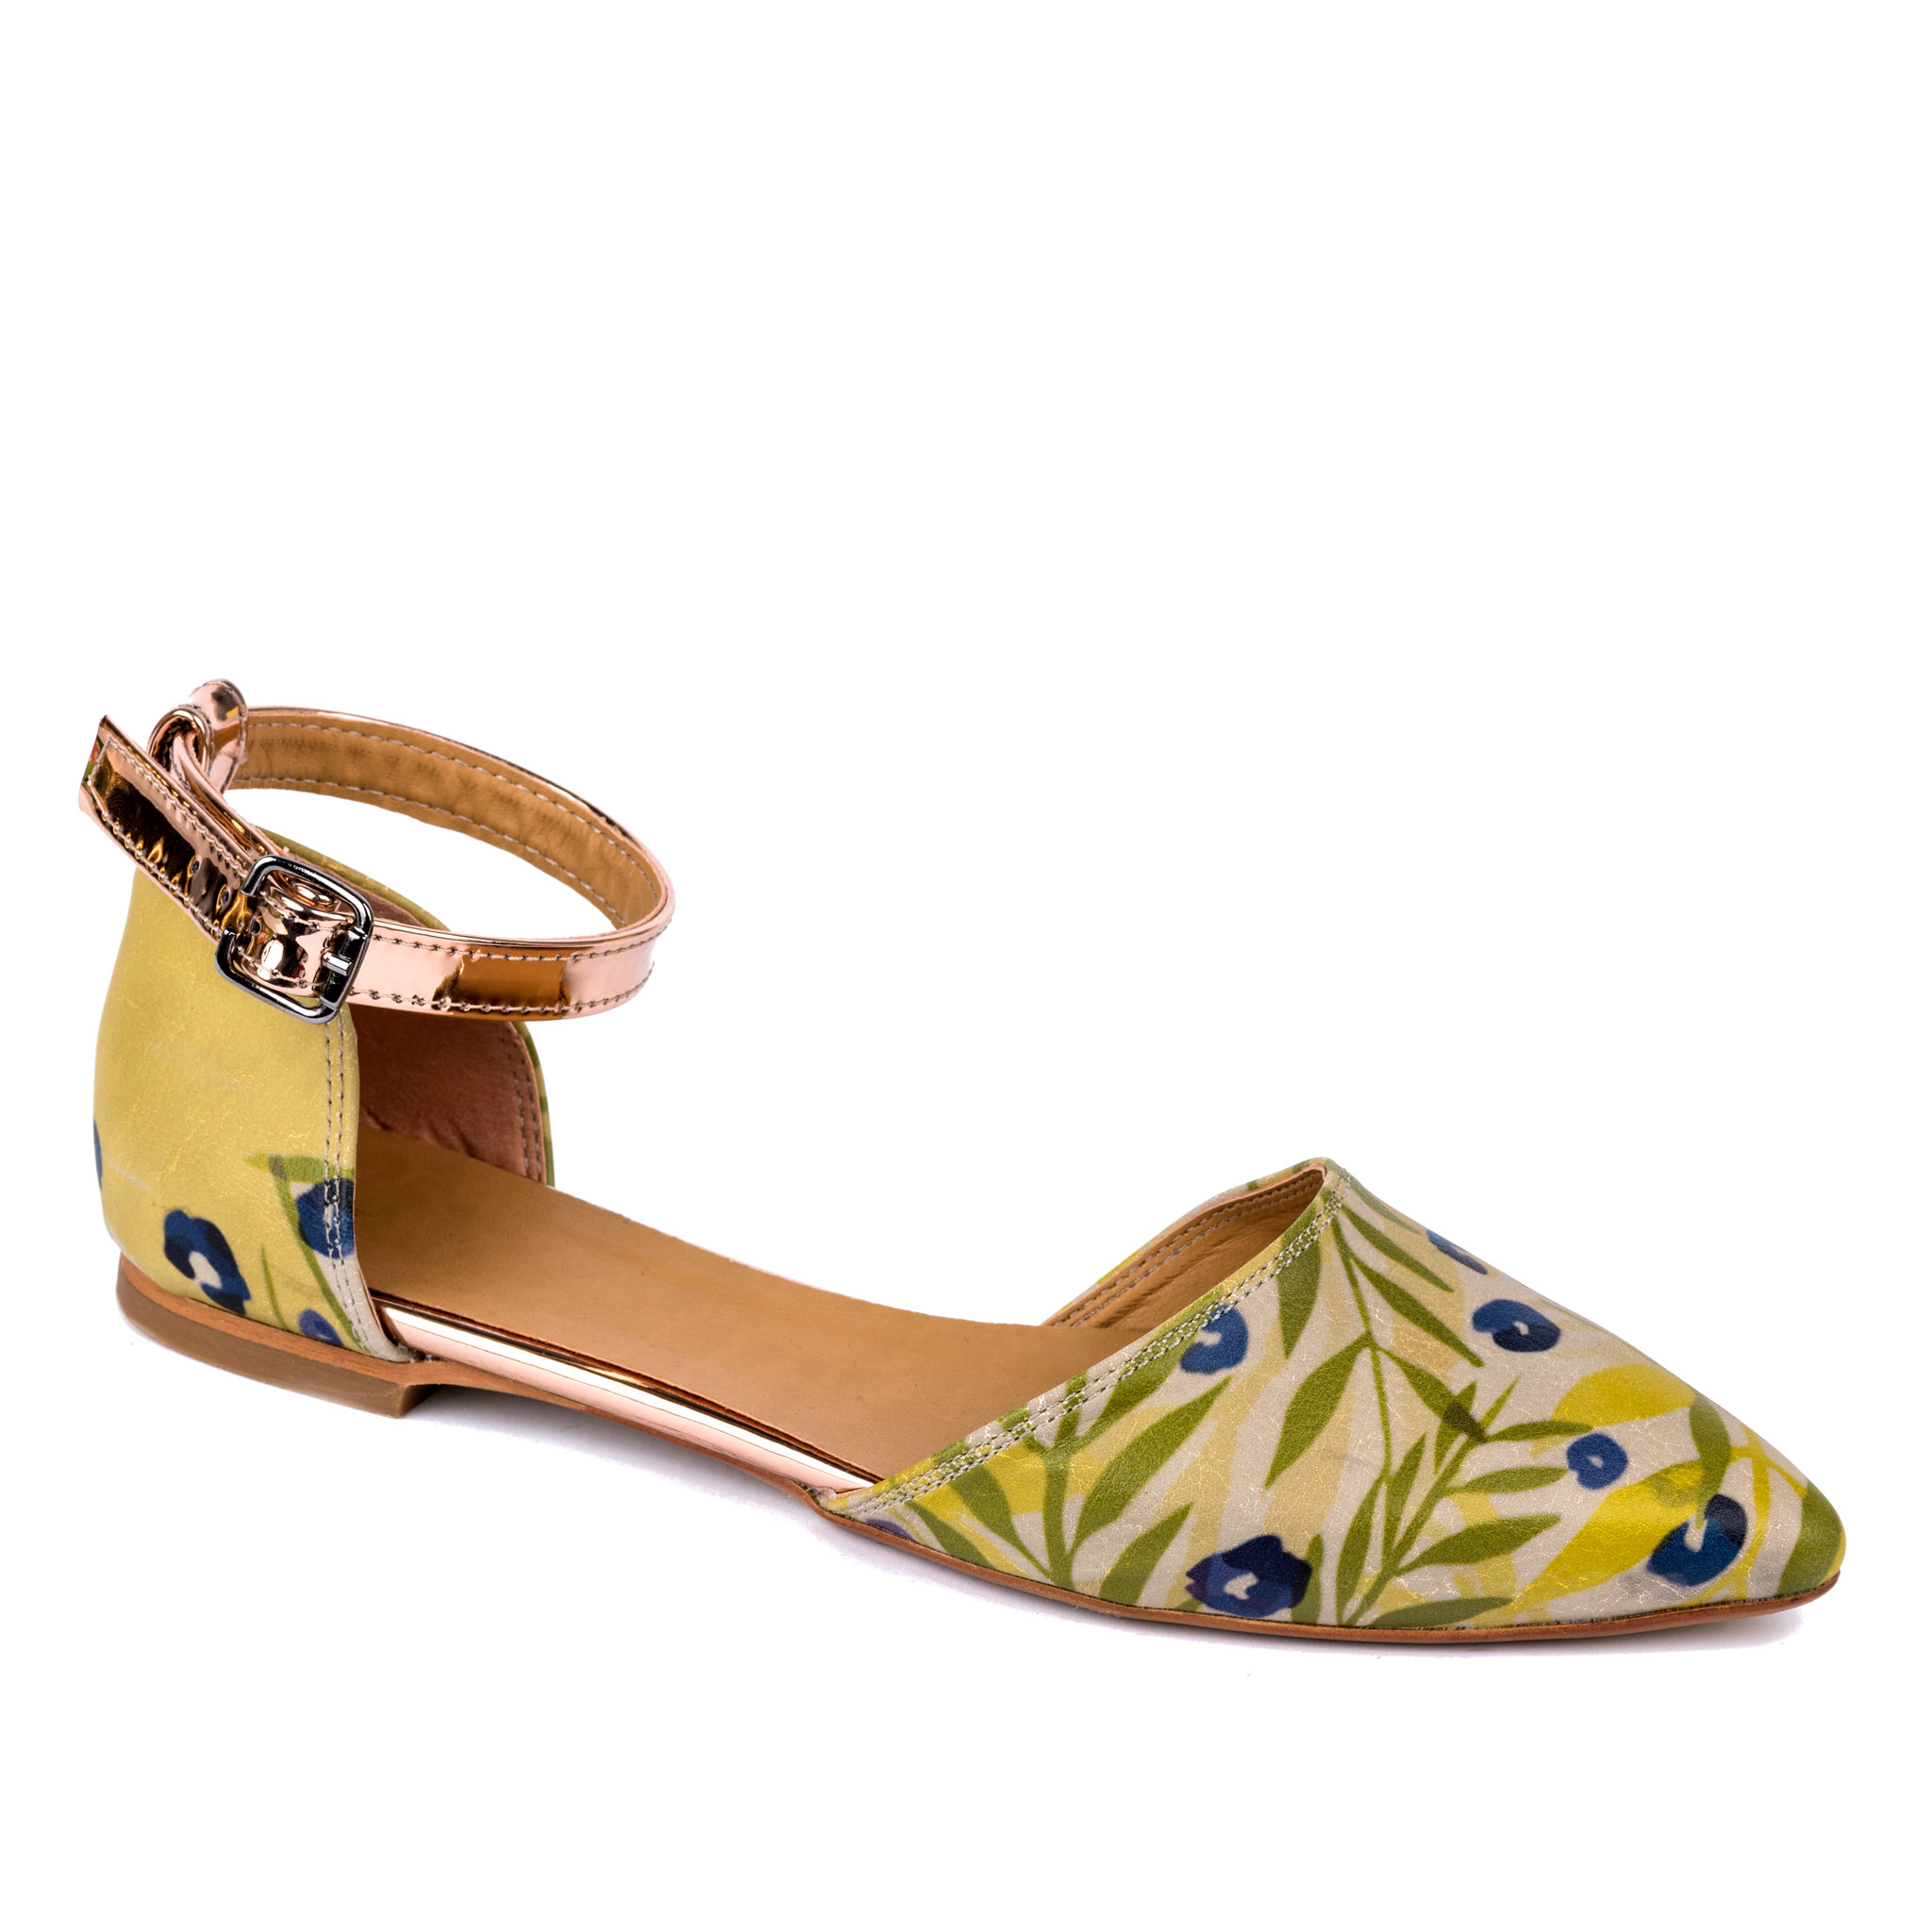 FLOWER PRINT POINTED FLATS - GREEN